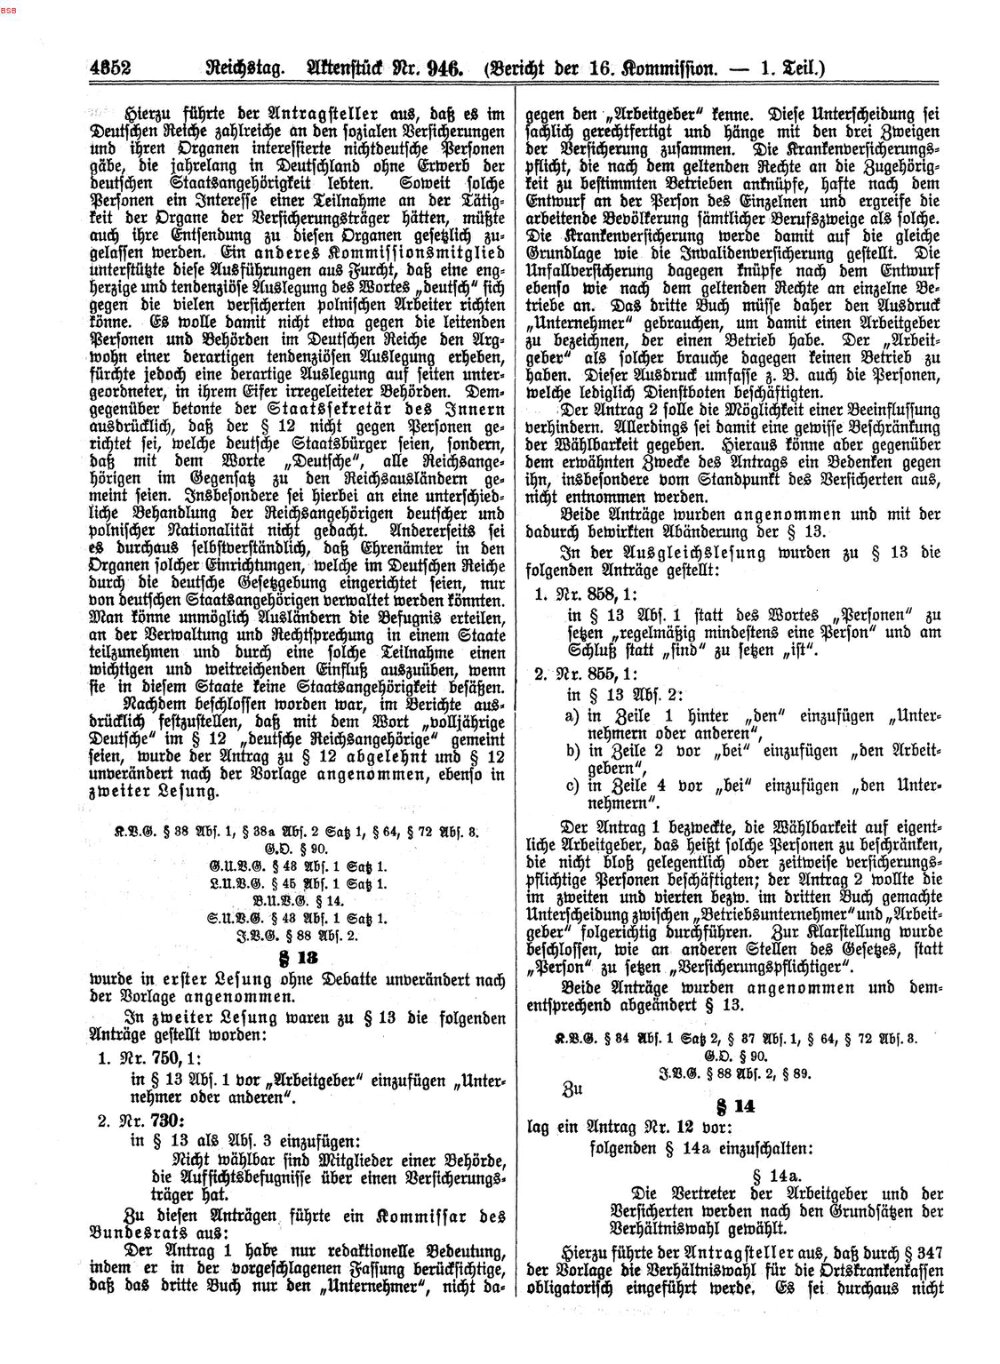 Scan of page 4352